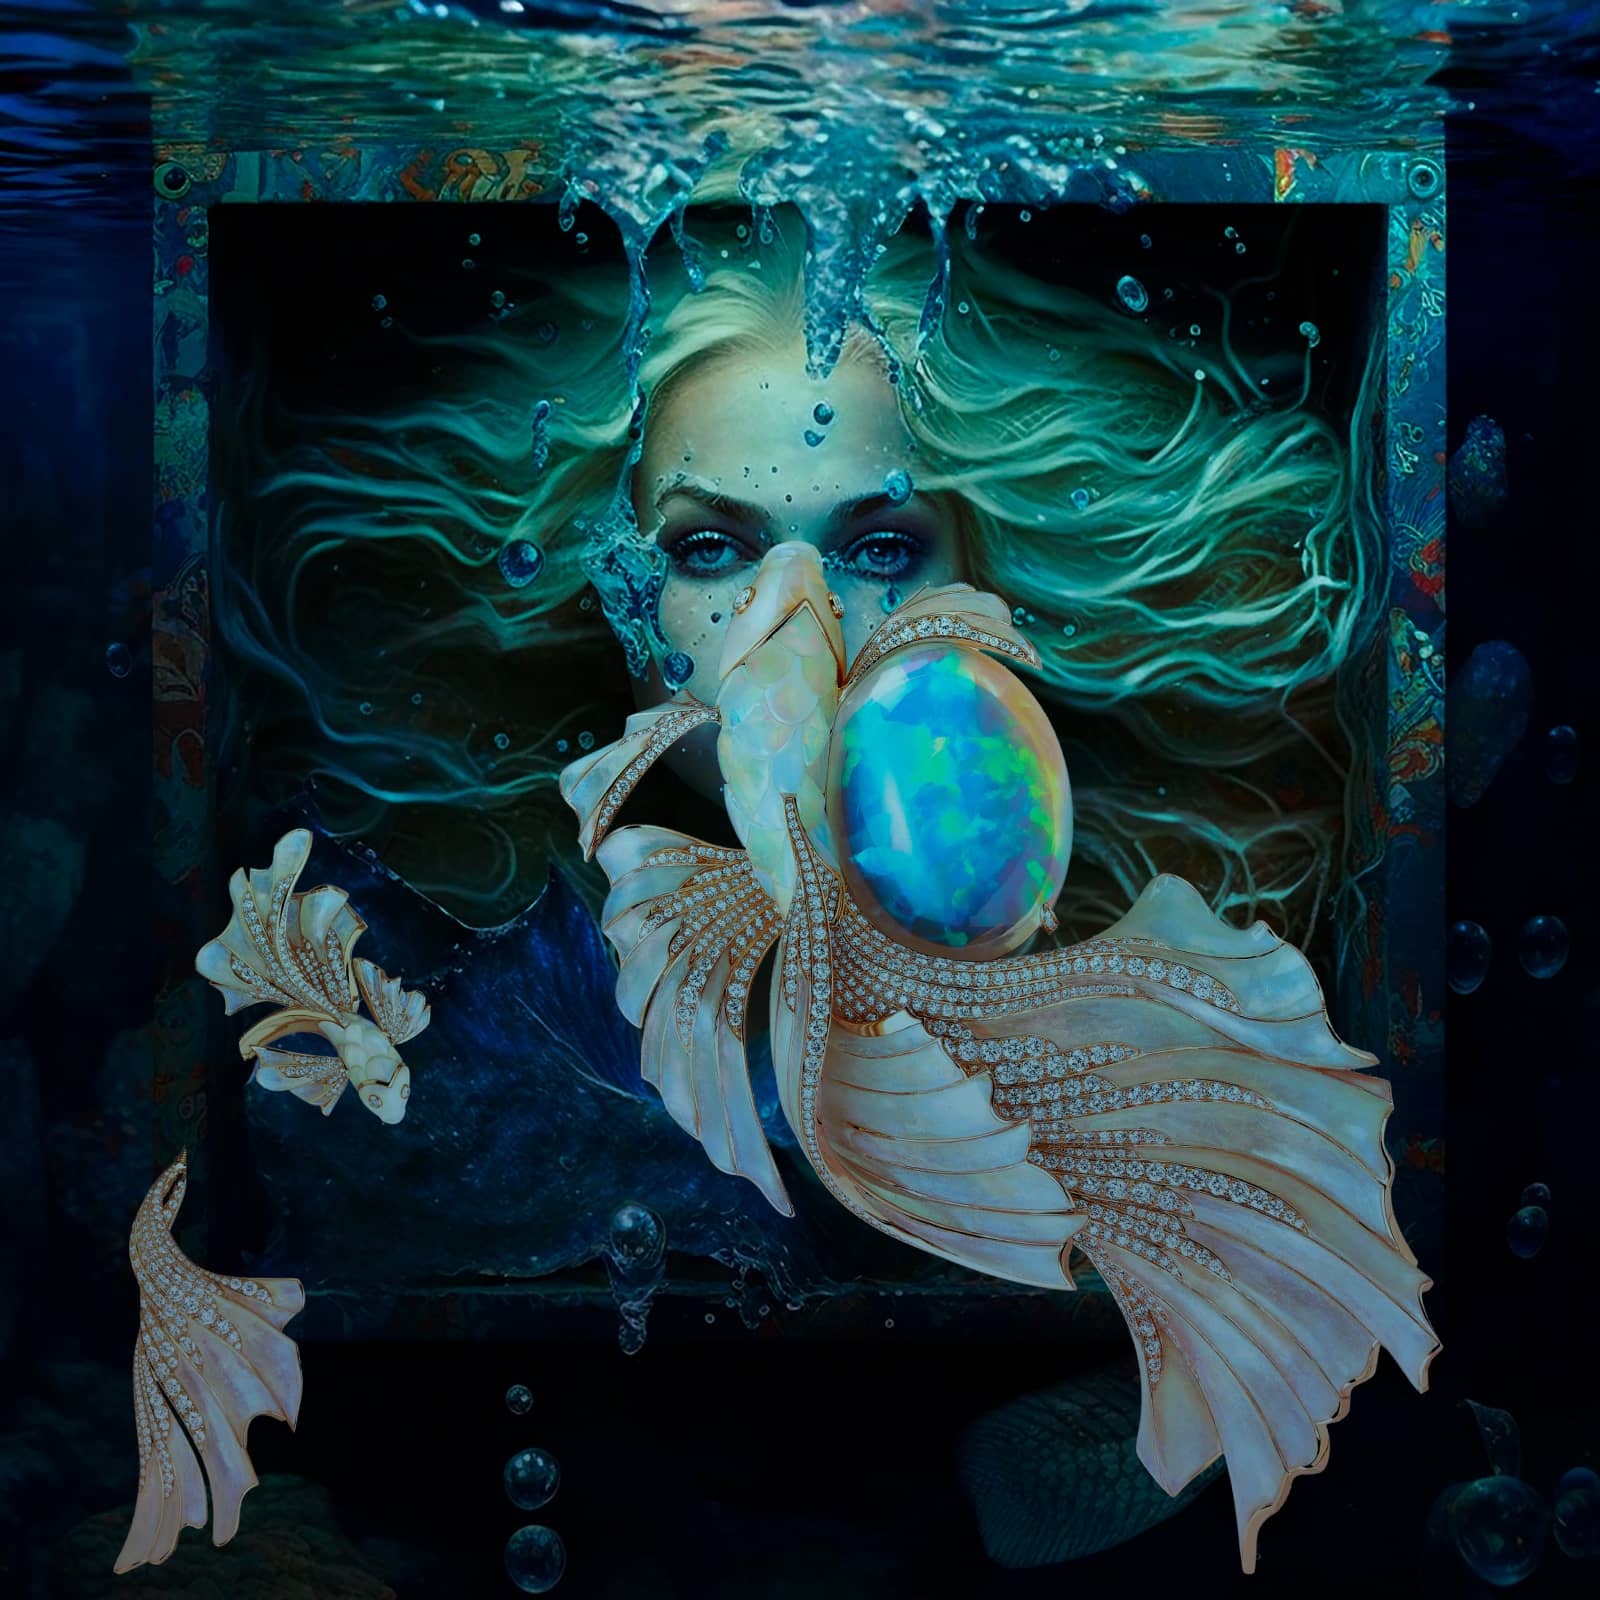 DROWN – An artwork showcasing the Opalescence plique-à-jour betta fish brooch from the Boucheron Holographique High Jewellery collection, set with an Ethiopian white opal cabochon of 71.69 carats